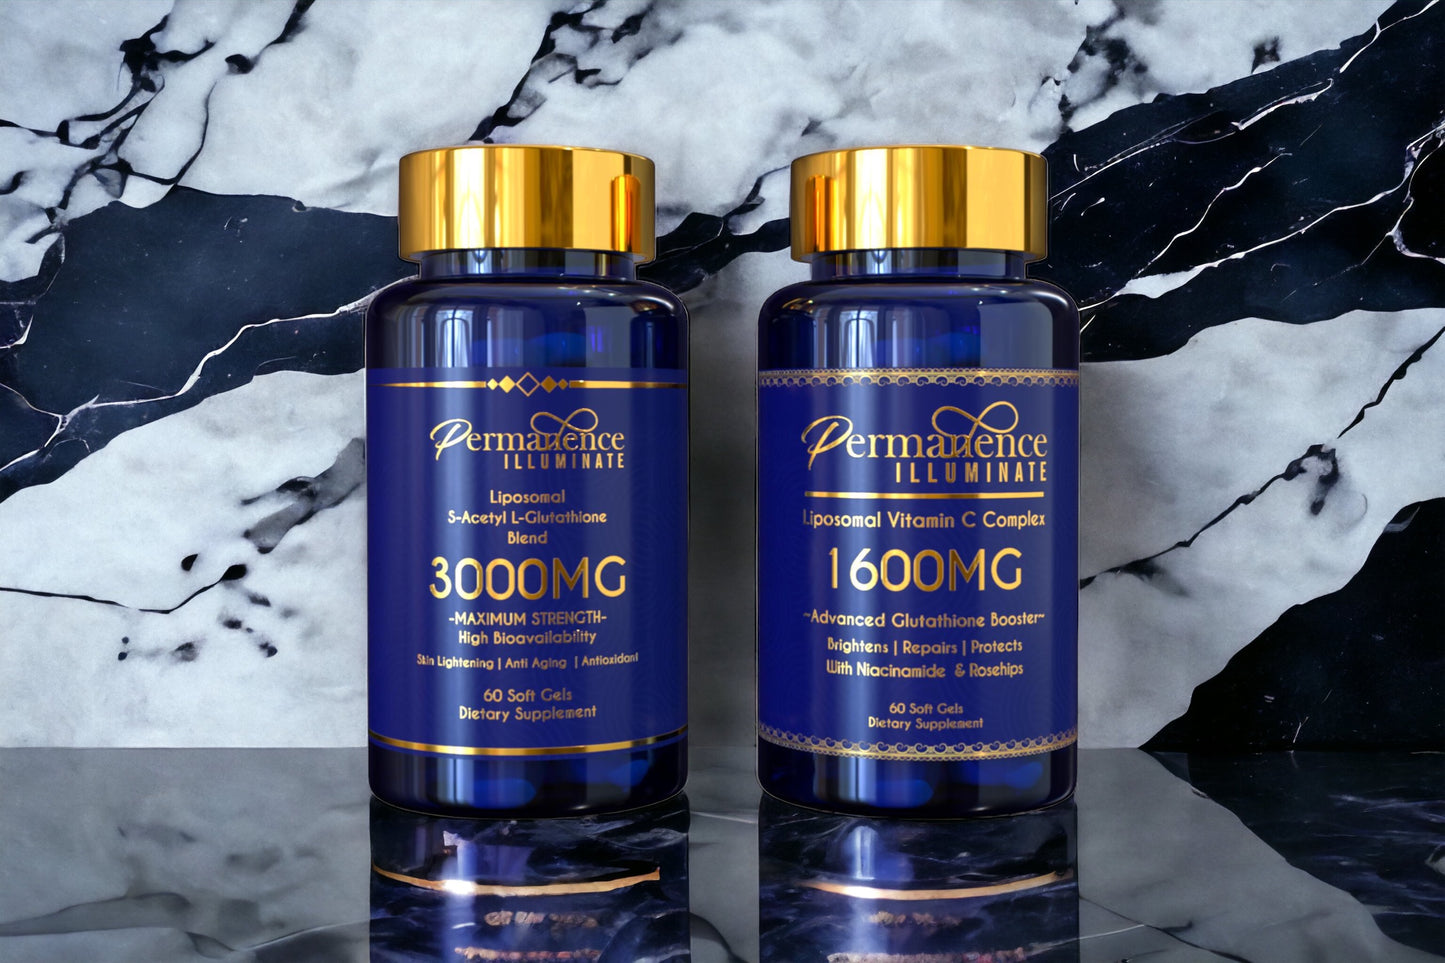 Glowing Duo: ILLUMINATE S-Acetyl & Vitamin C Combination for Optimal Skin Brightening Results